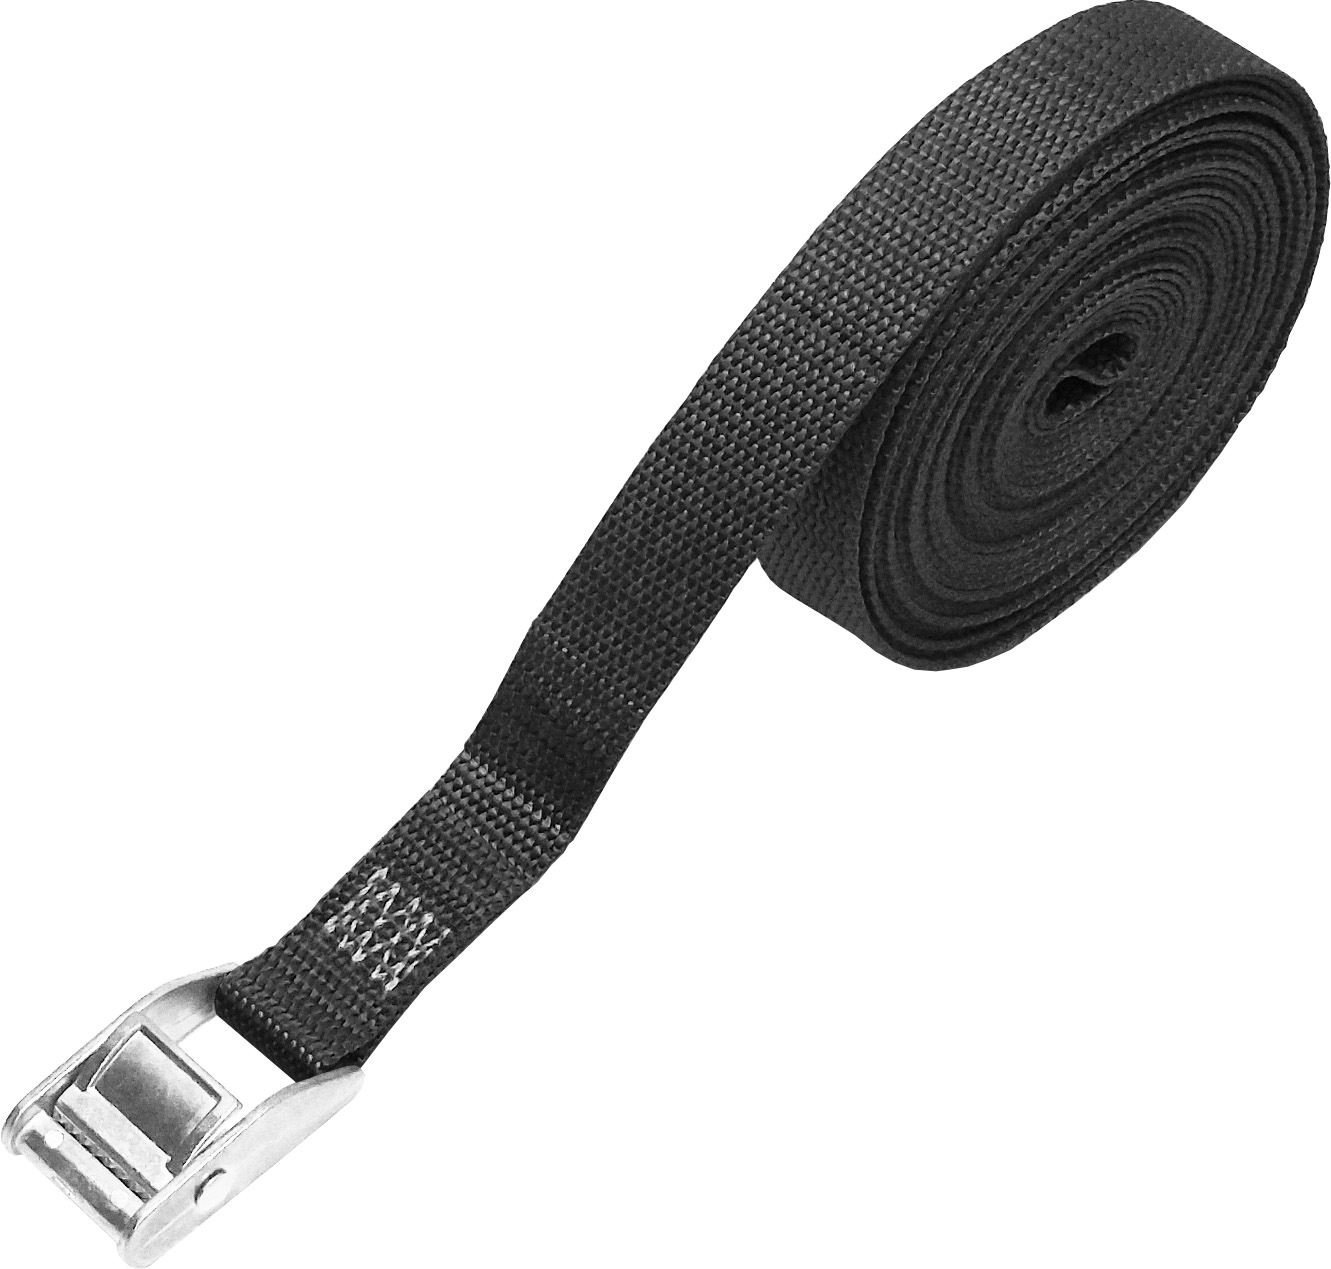 CustomTieDowns 1 Inch x 30 Foot Cinch Strap Endless Loop Tie Down, Loose End Of Strap Is Angle Cut For Easy Feed Through Buckle 2702 - image 1 of 2